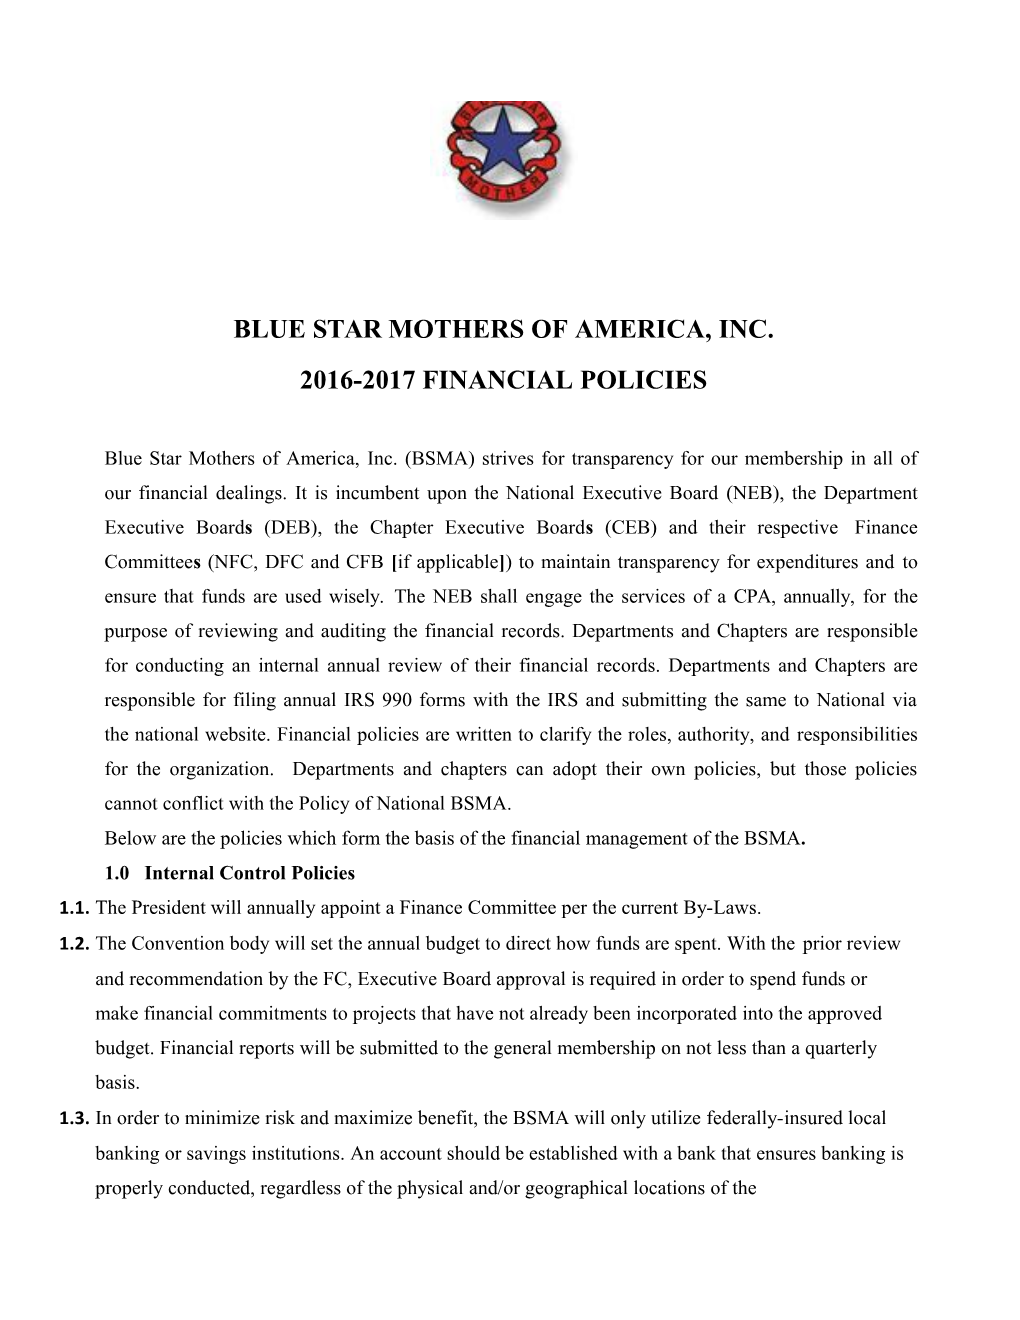 Blue Star Mothers of America,Inc